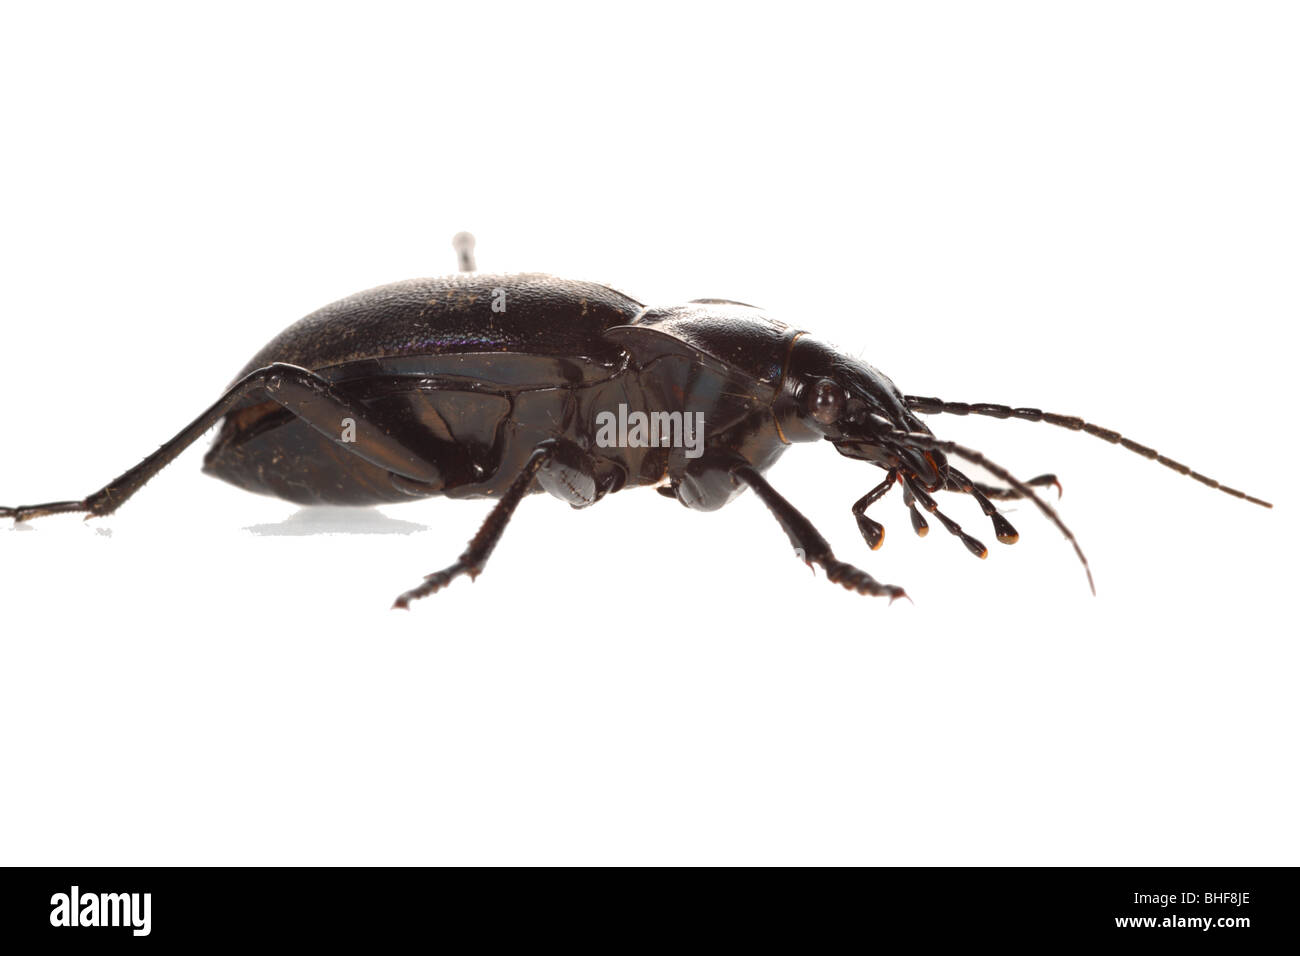 Violet Ground Beetle (Carabus violaceus). Live insect photographed against a white background on a portable studio. Stock Photo